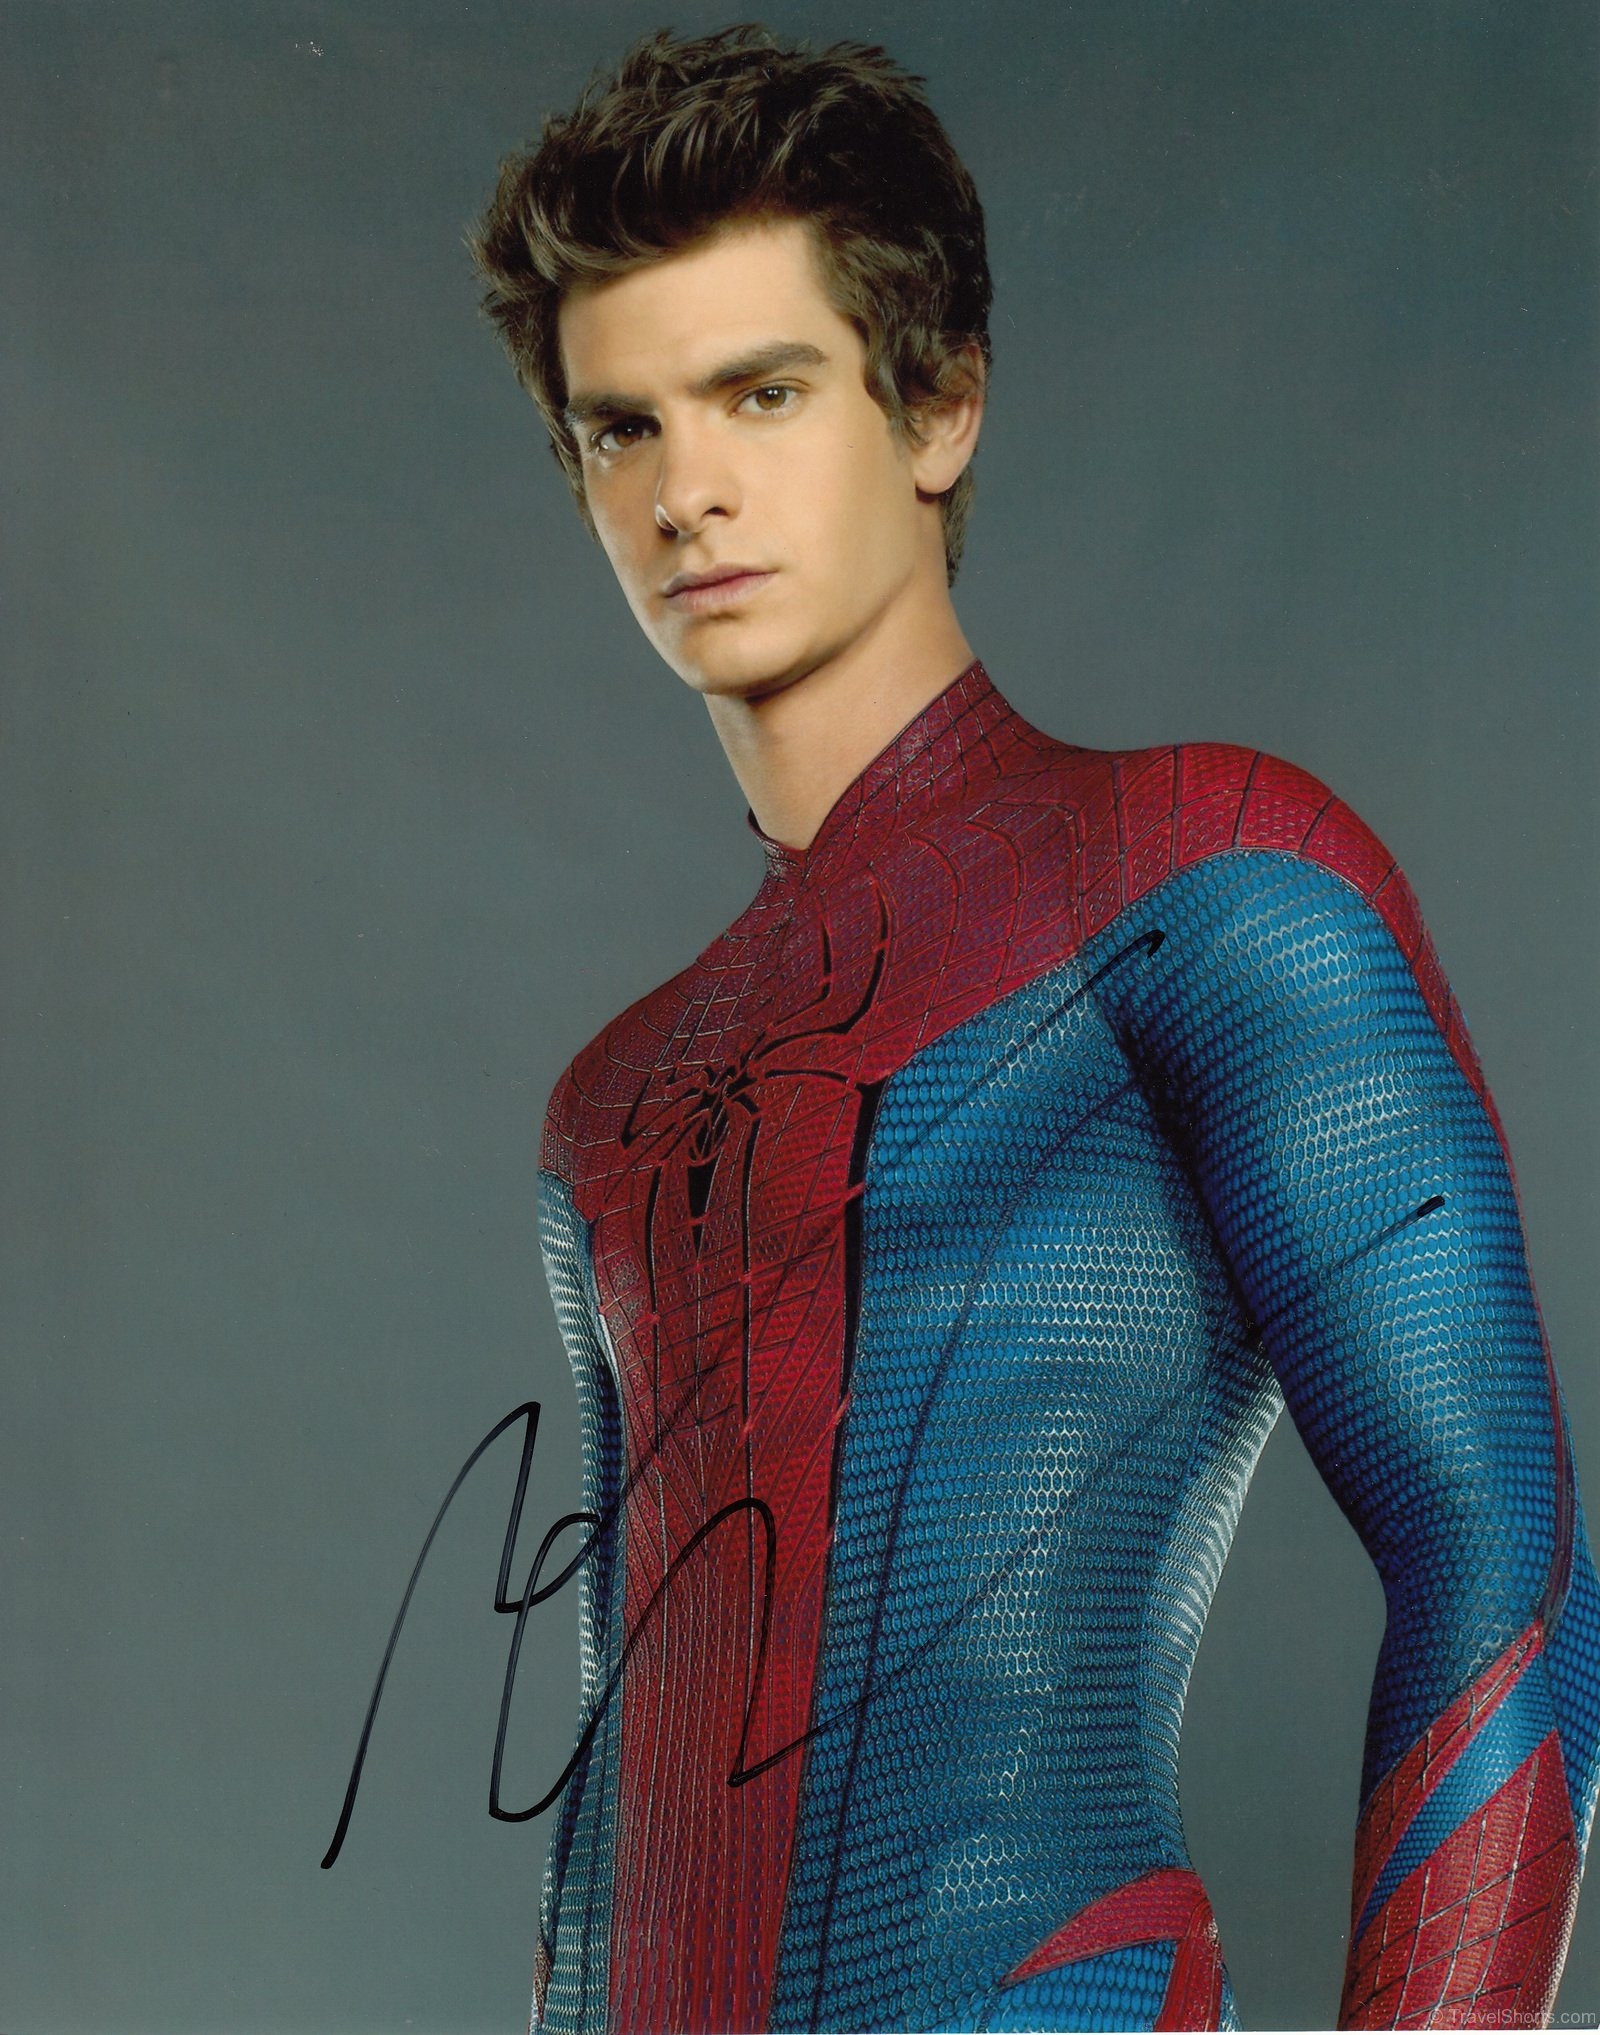 Andrew-Garfield-Signed-Photograph